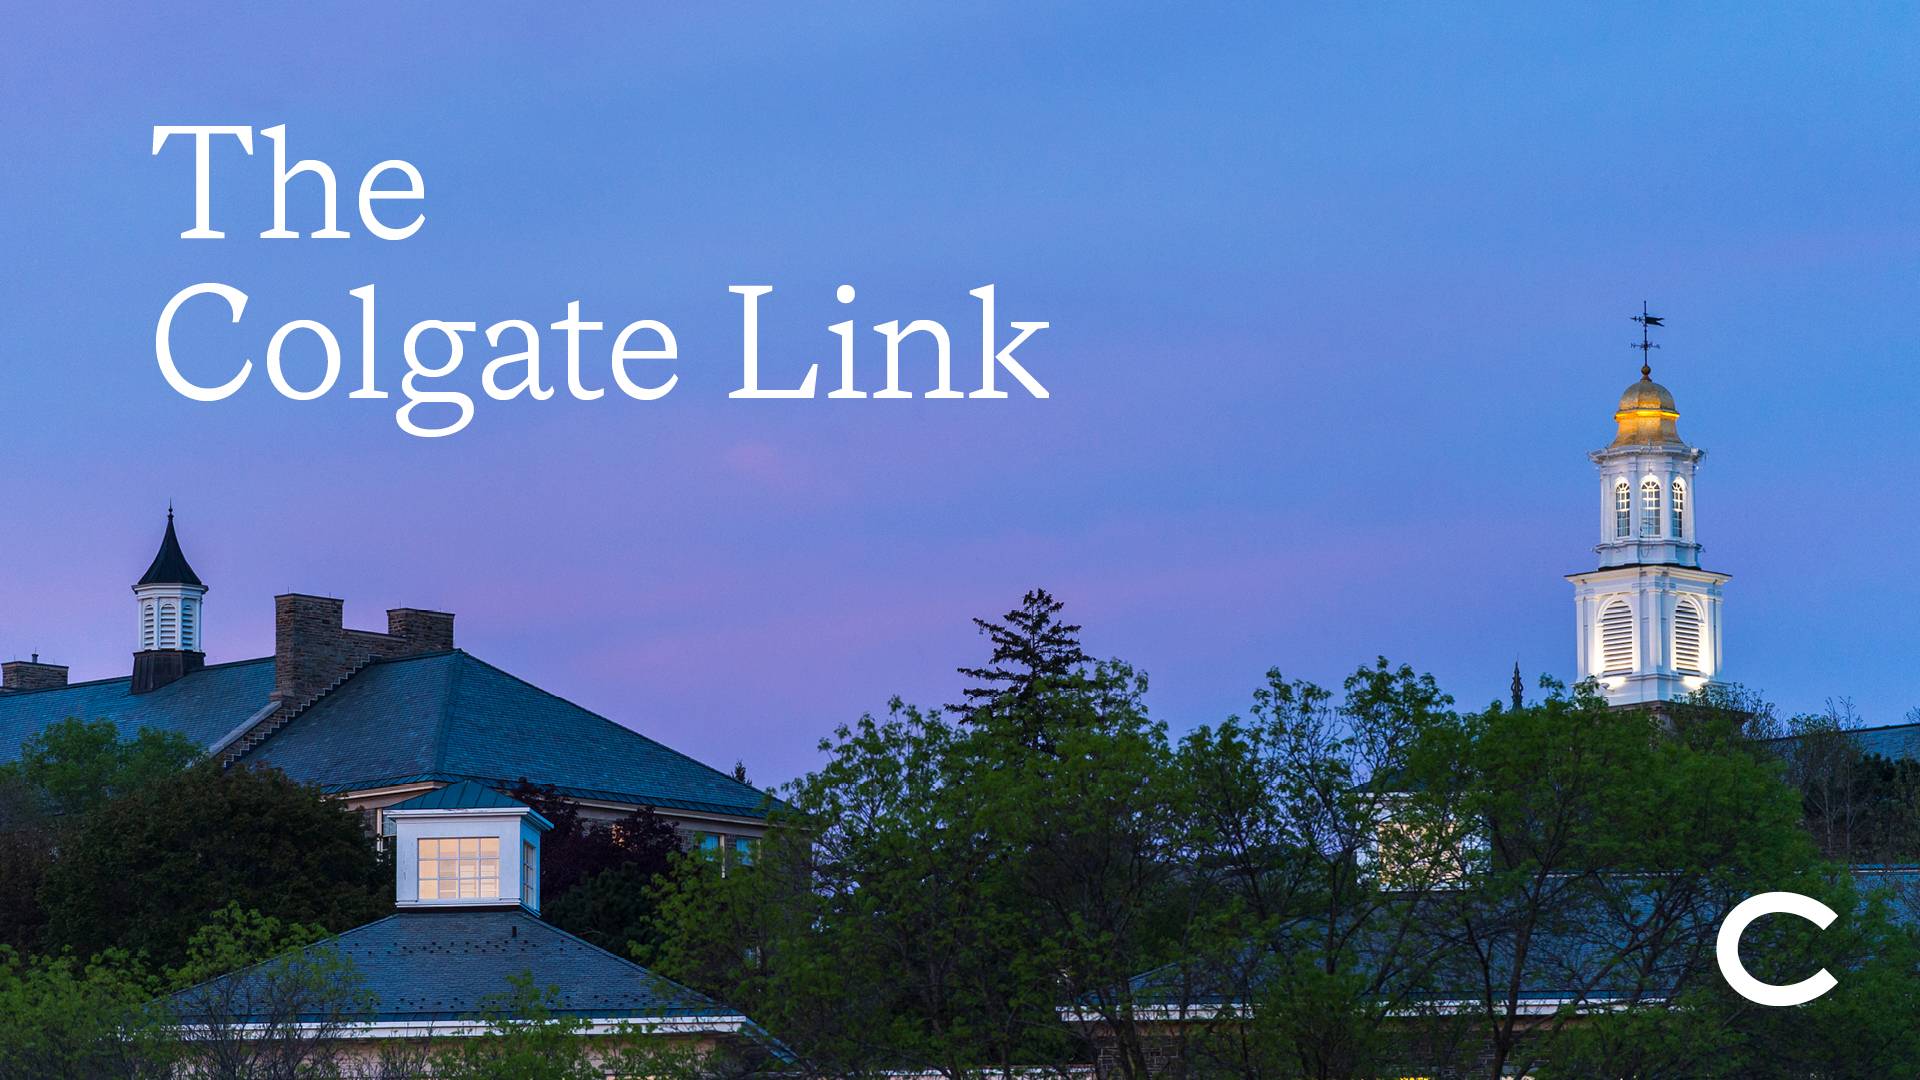 The Colgate Link is Colgate's new online community, forging powerful connections for alumni and students.